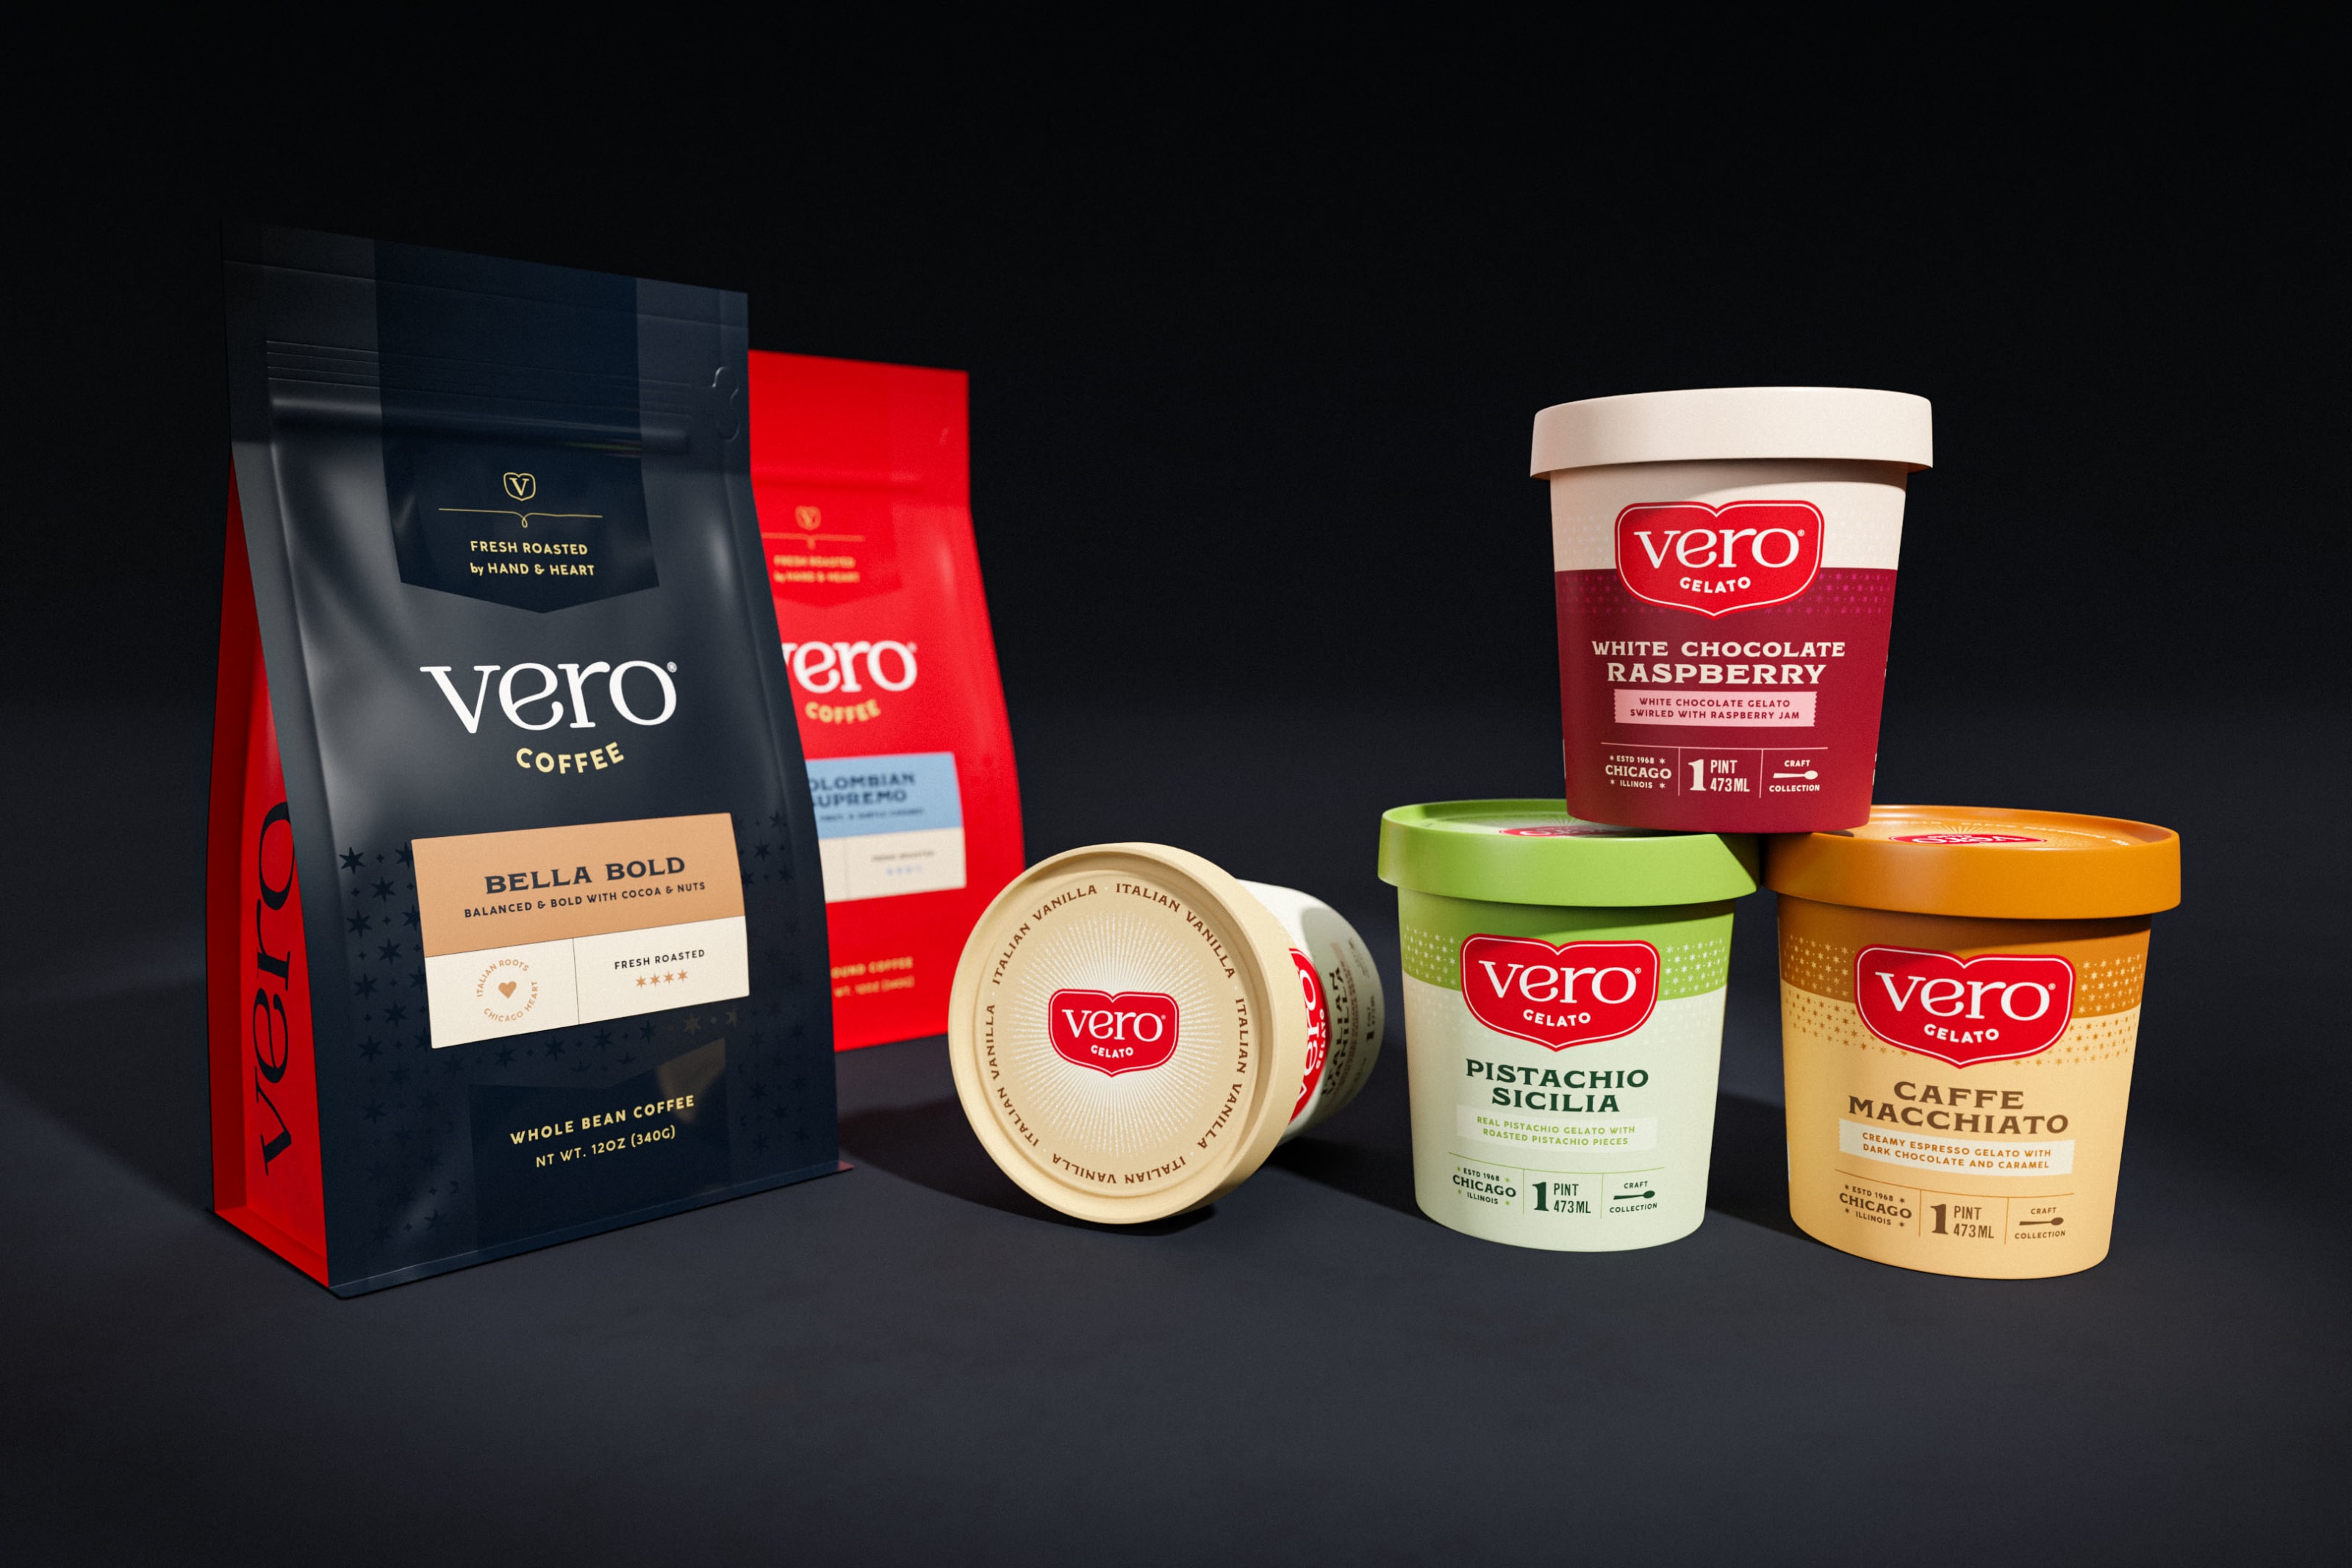 different variations of vero logo on packaging